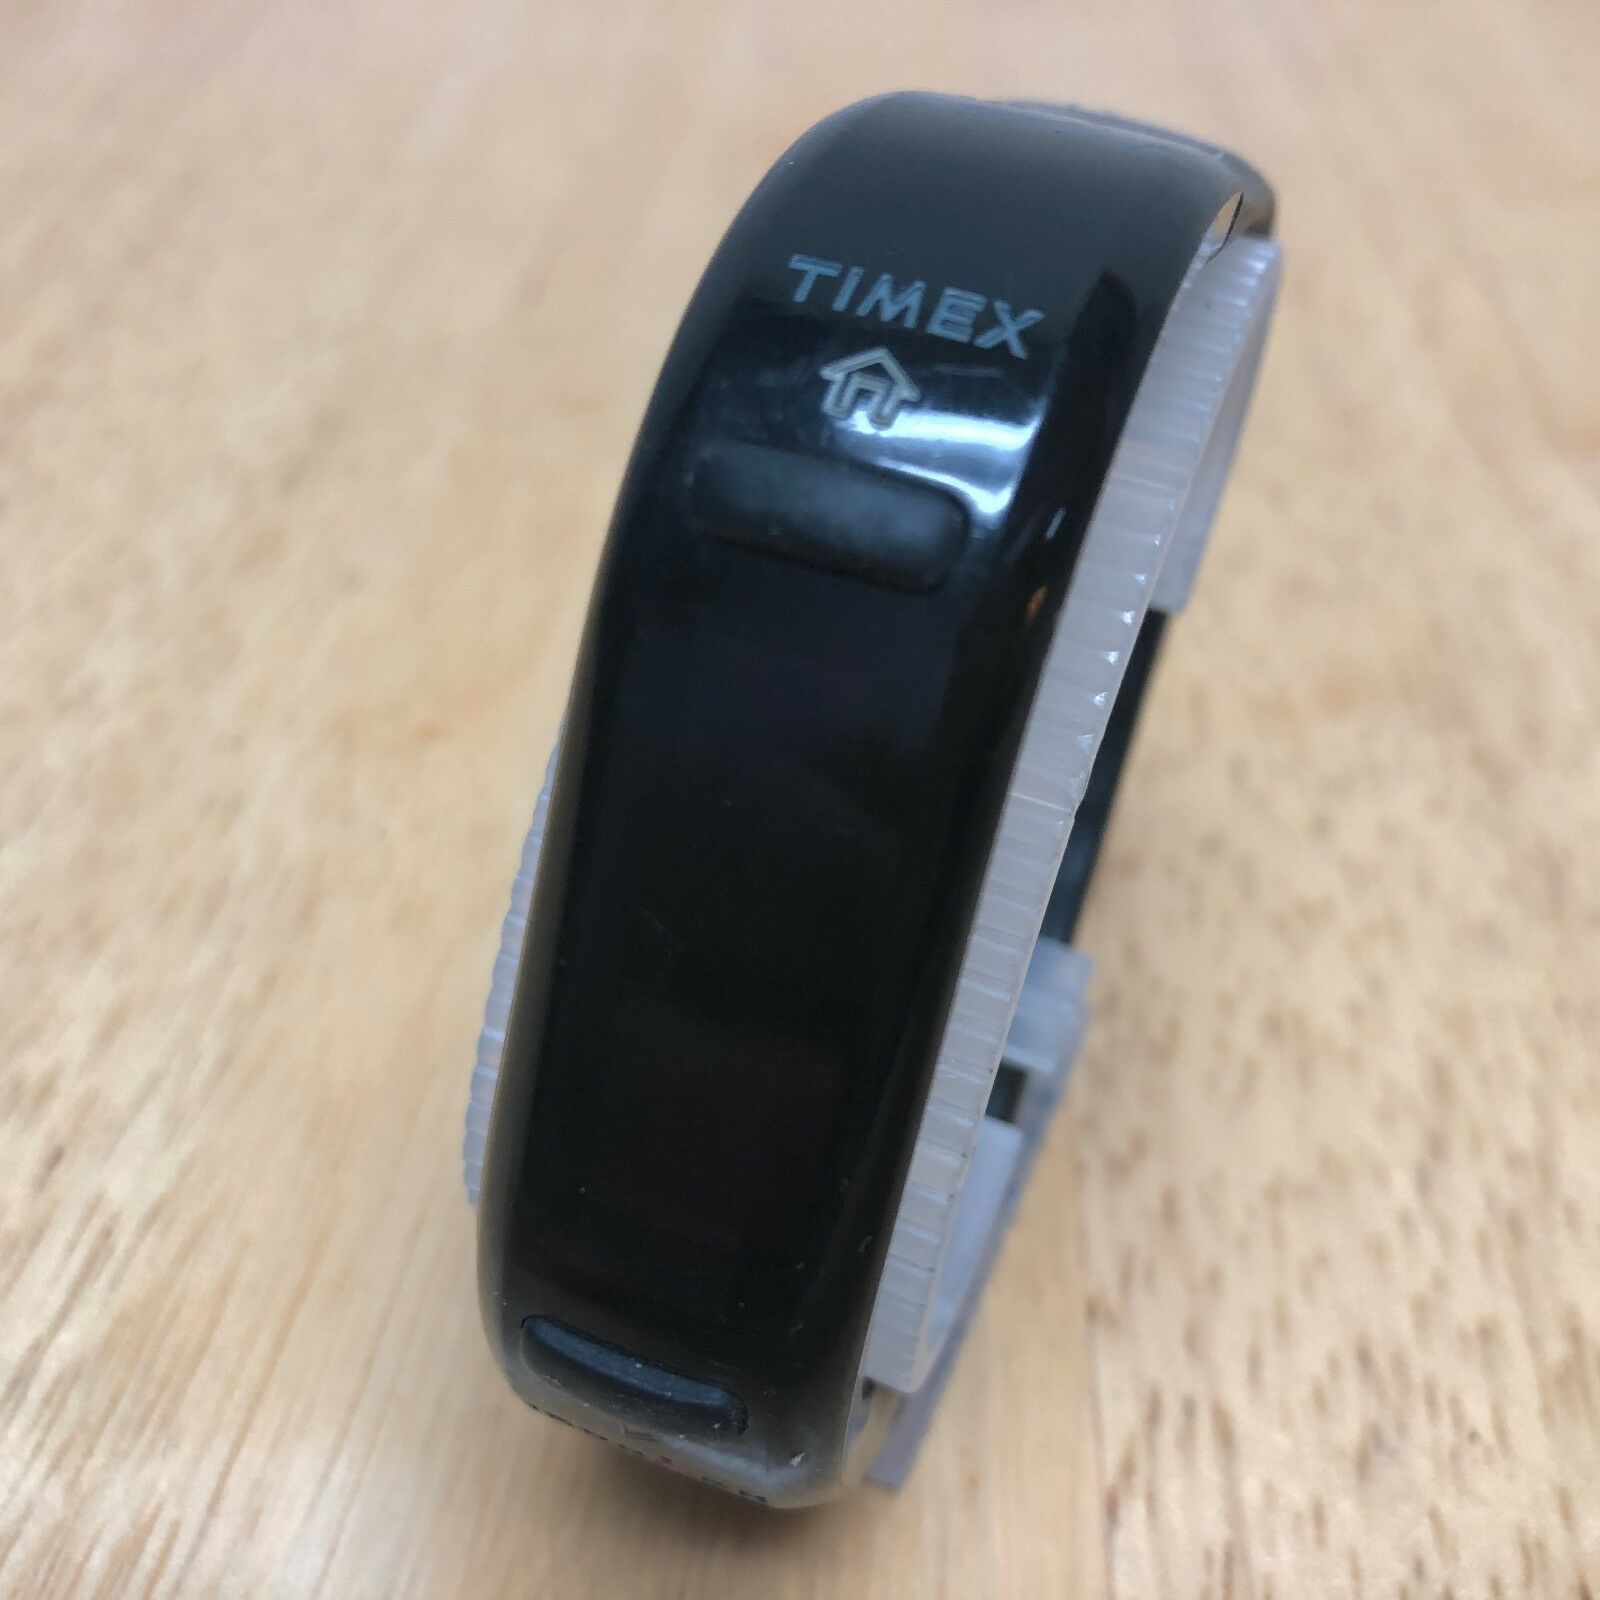 Timex Ironman Bluetooth Fitness Activity Tracker Wristband Watch Hour~Untested - $18.56